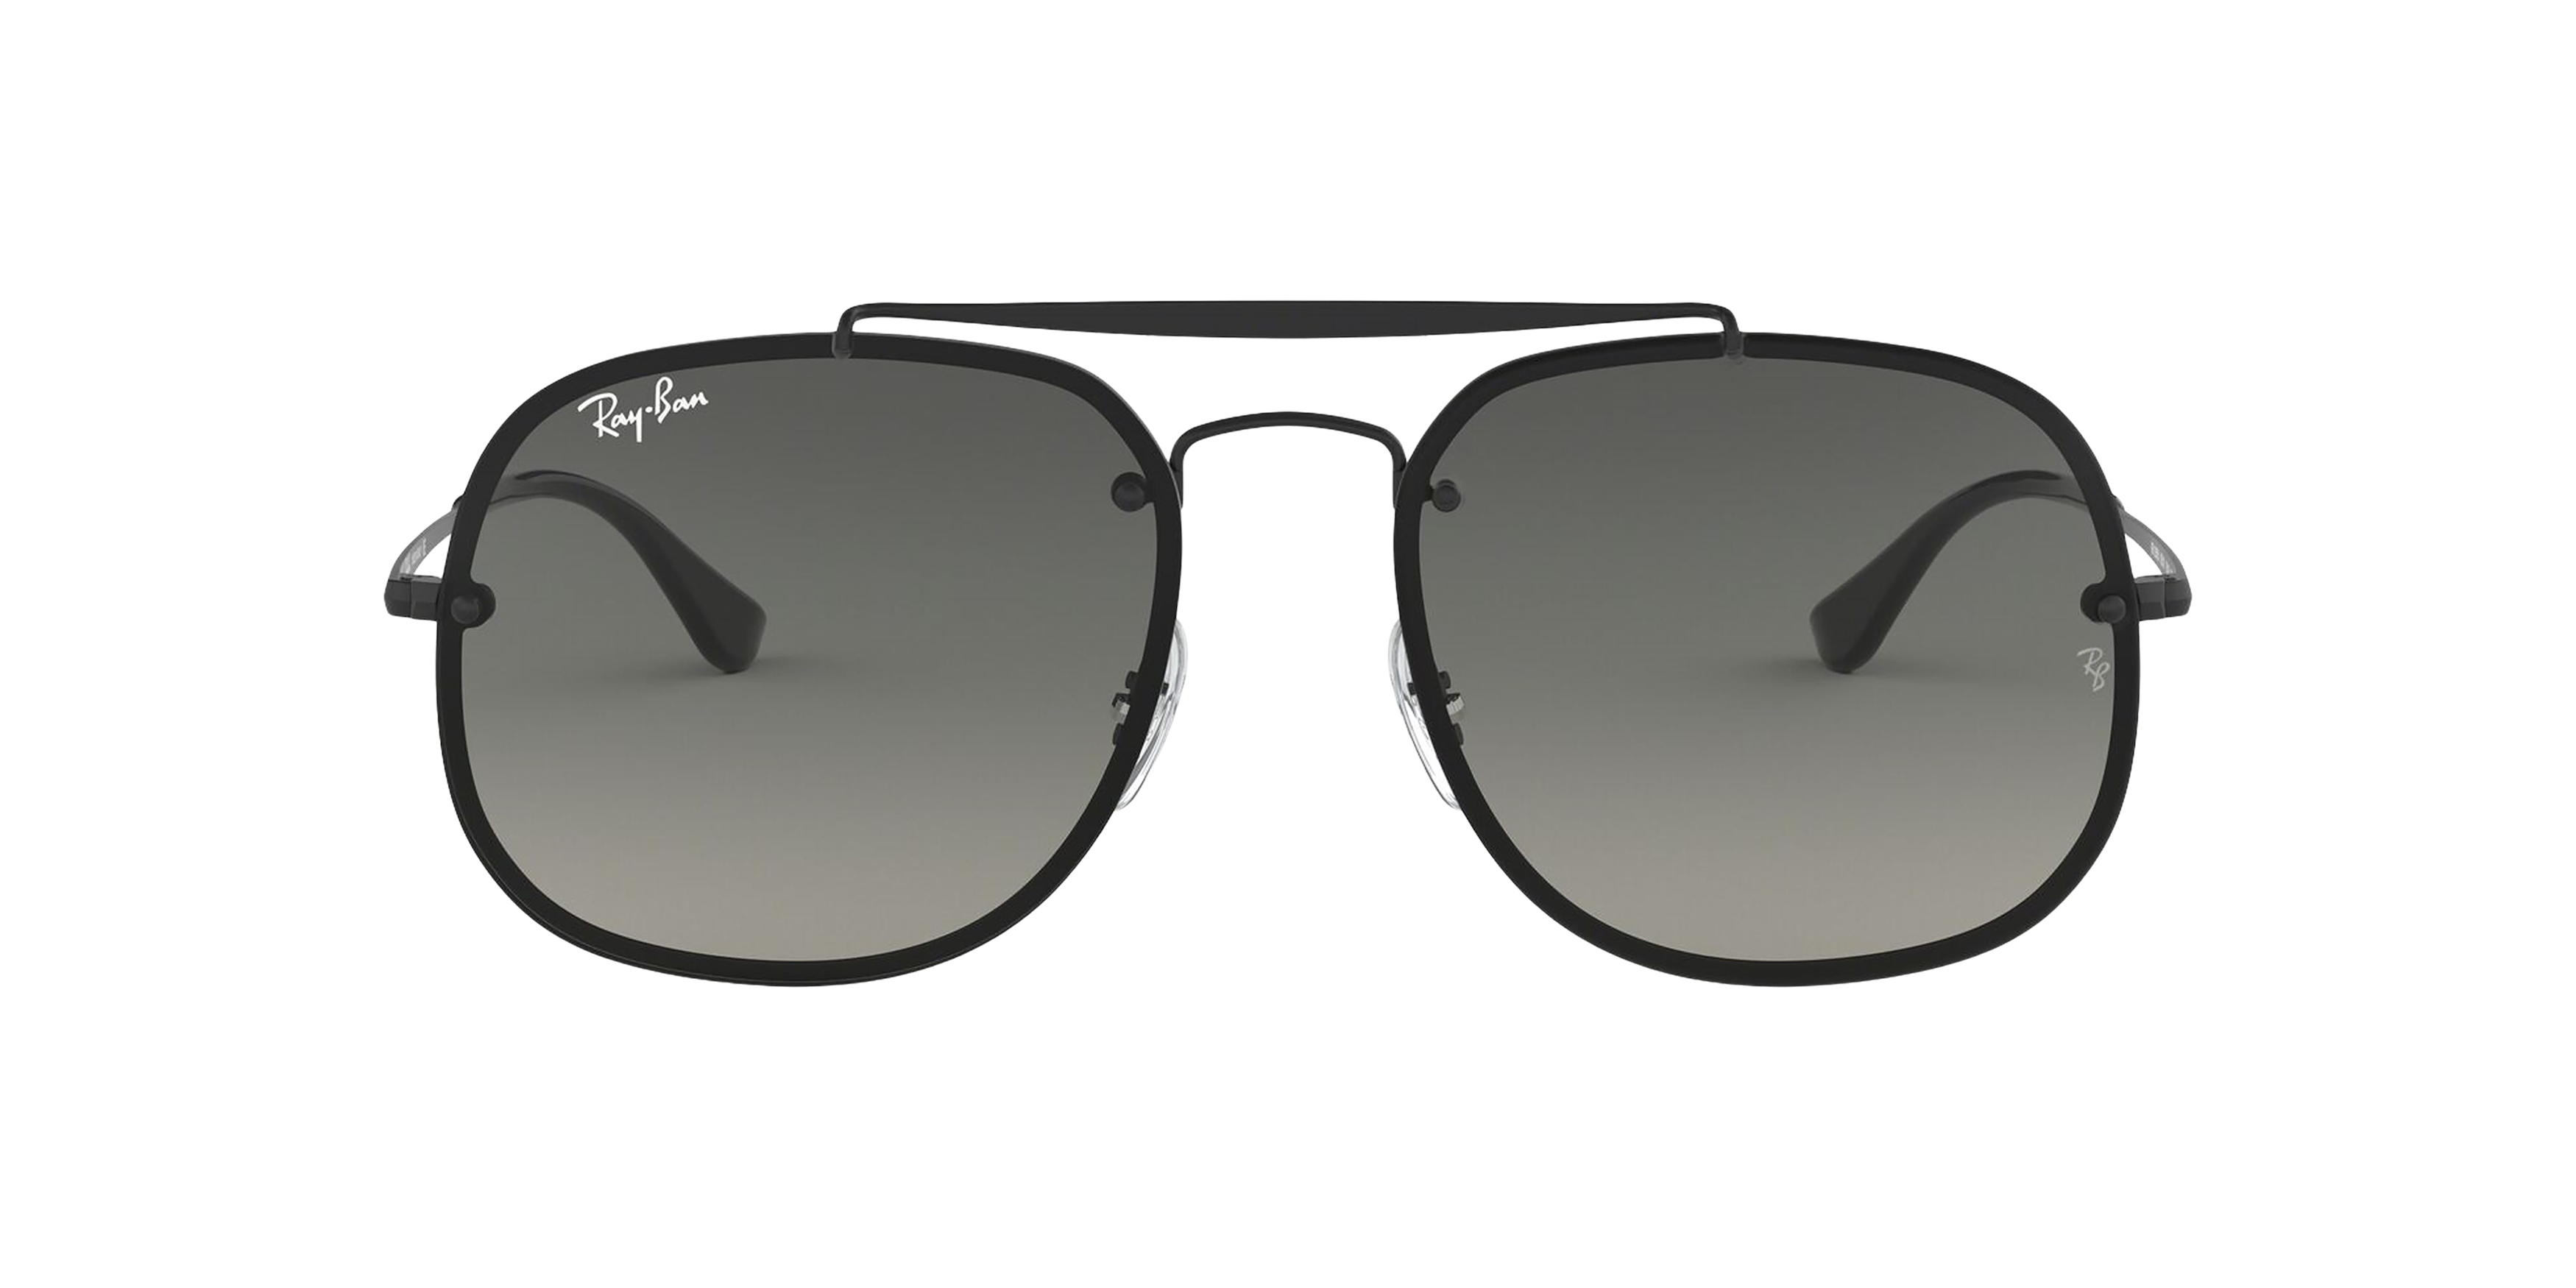 [products.image.front] Ray-Ban Blaze General RB3583N 153/11